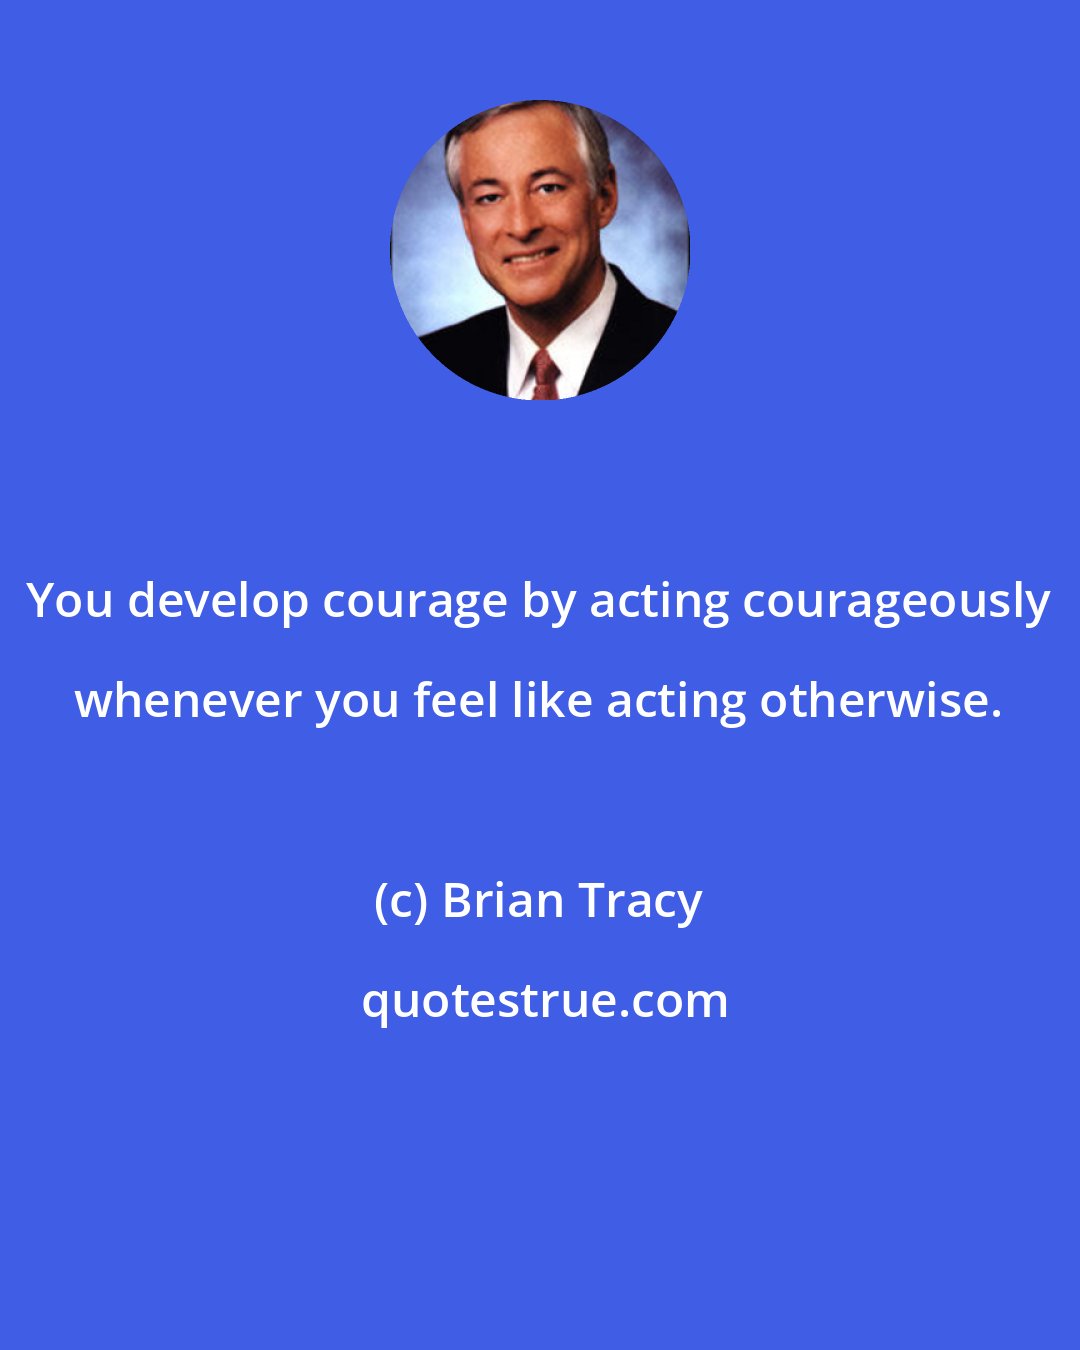 Brian Tracy: You develop courage by acting courageously whenever you feel like acting otherwise.